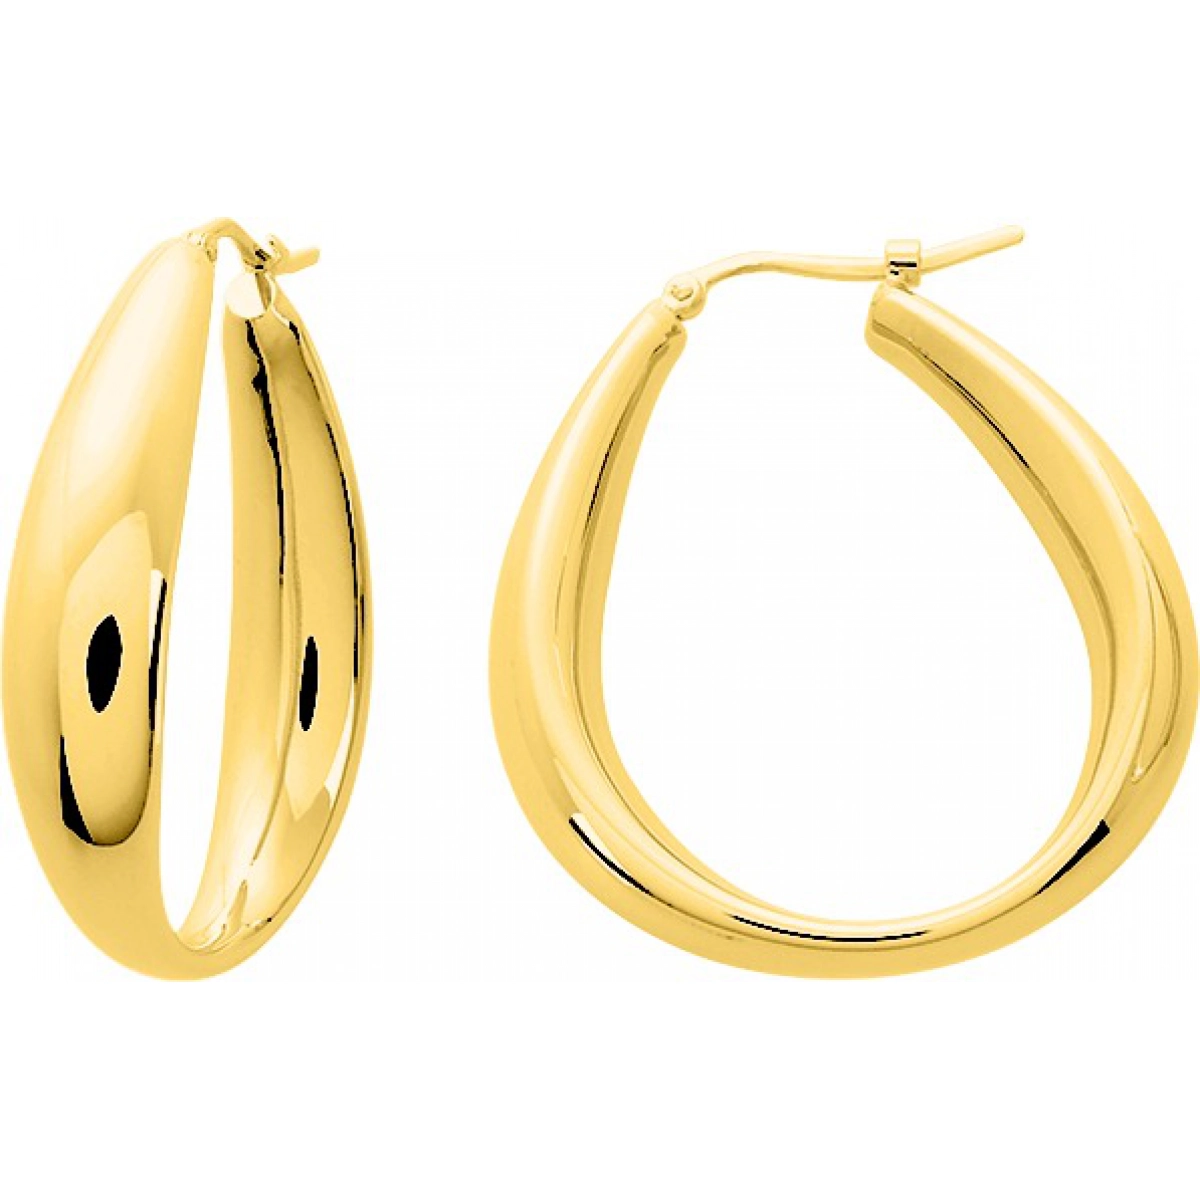 Earrings pair electroformed gold plated Brass  Lua Blanca  135553.0